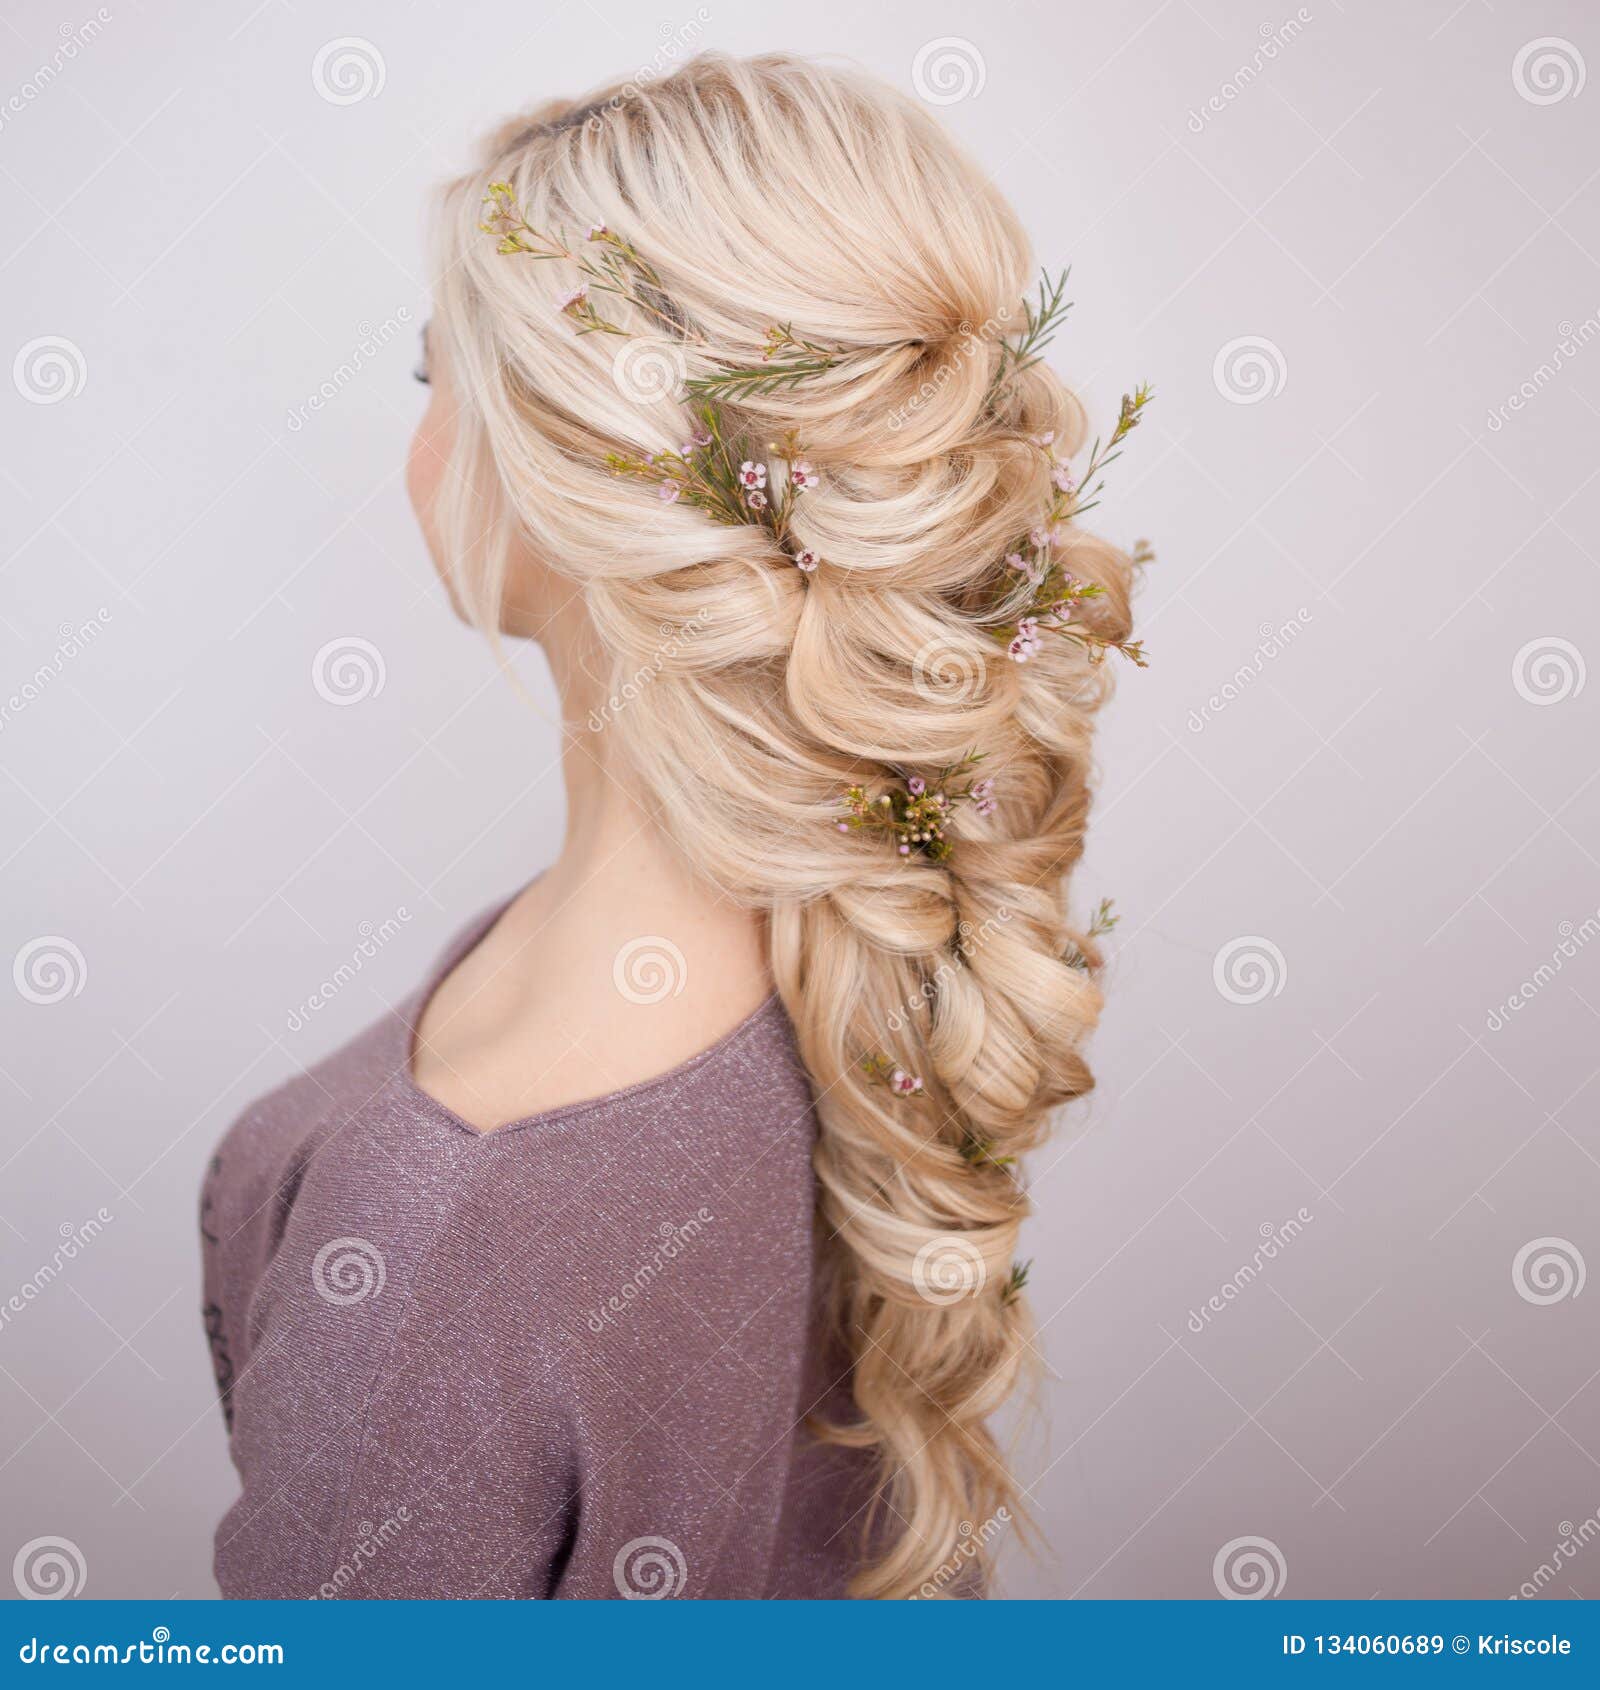 Hairstyles with Weaving Strands Decorated with Small Flowers. Stock Image -  Image of female, model: 134060689